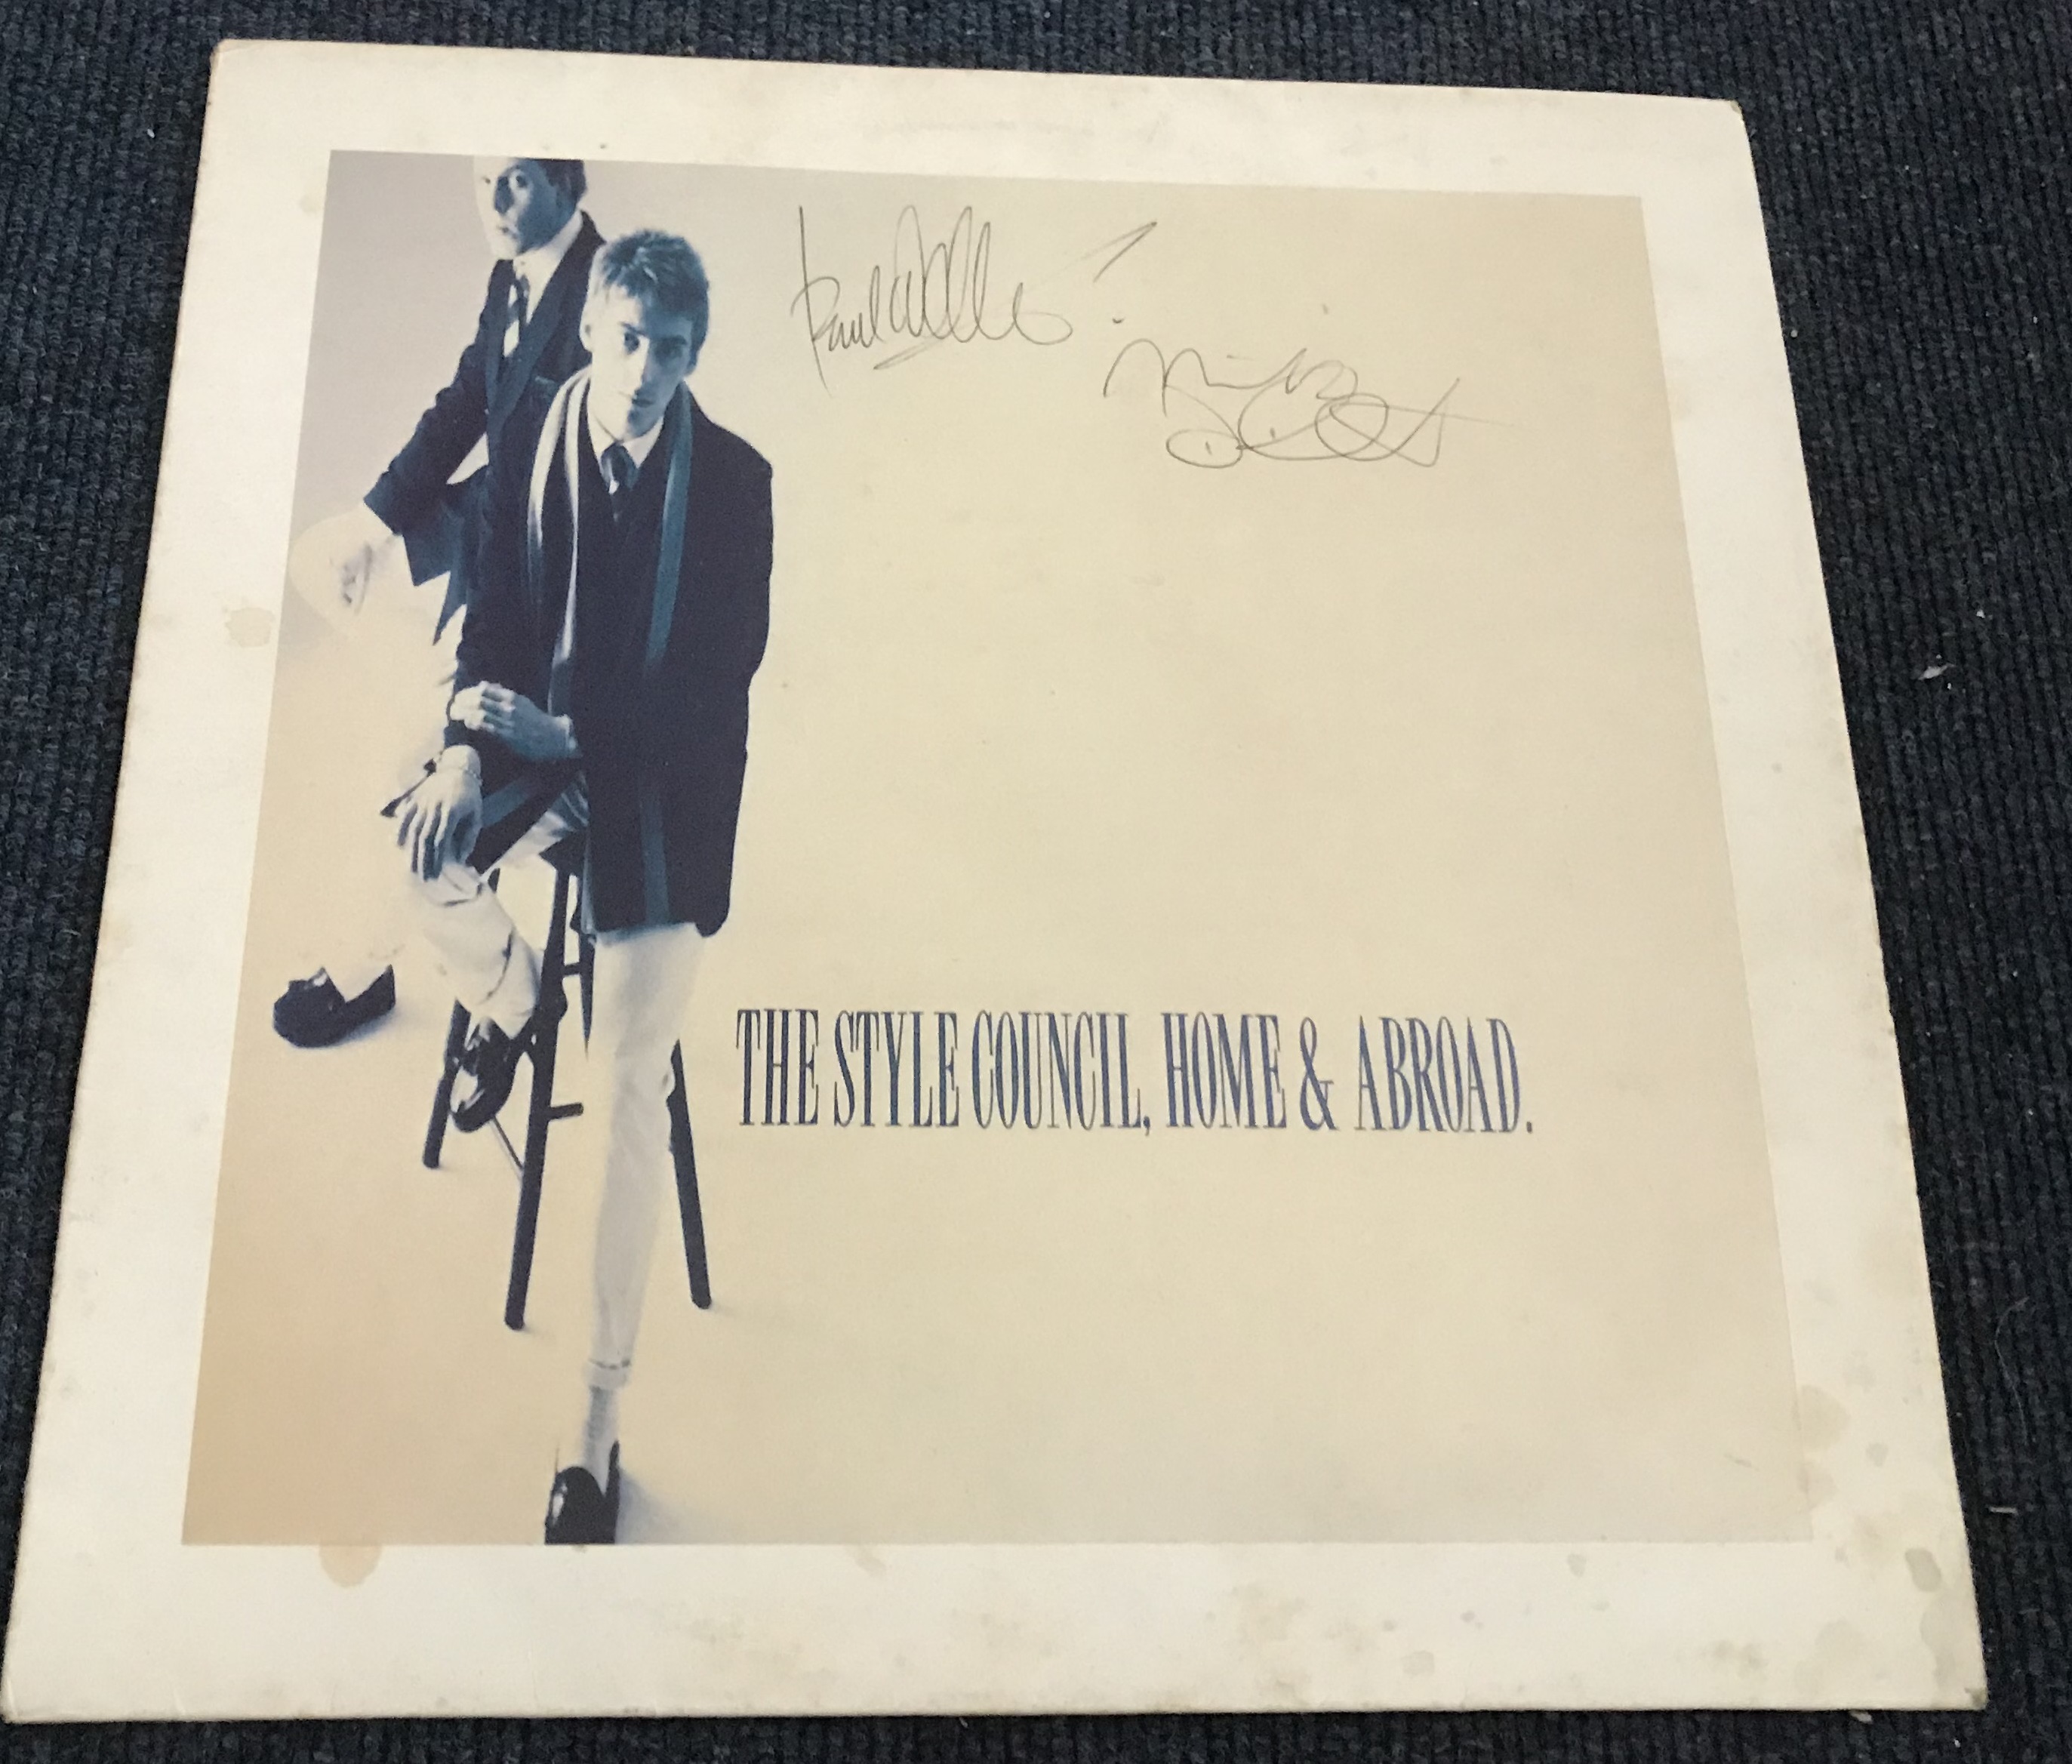 The Style Council Home and Abroad signed 33rpm record cover.